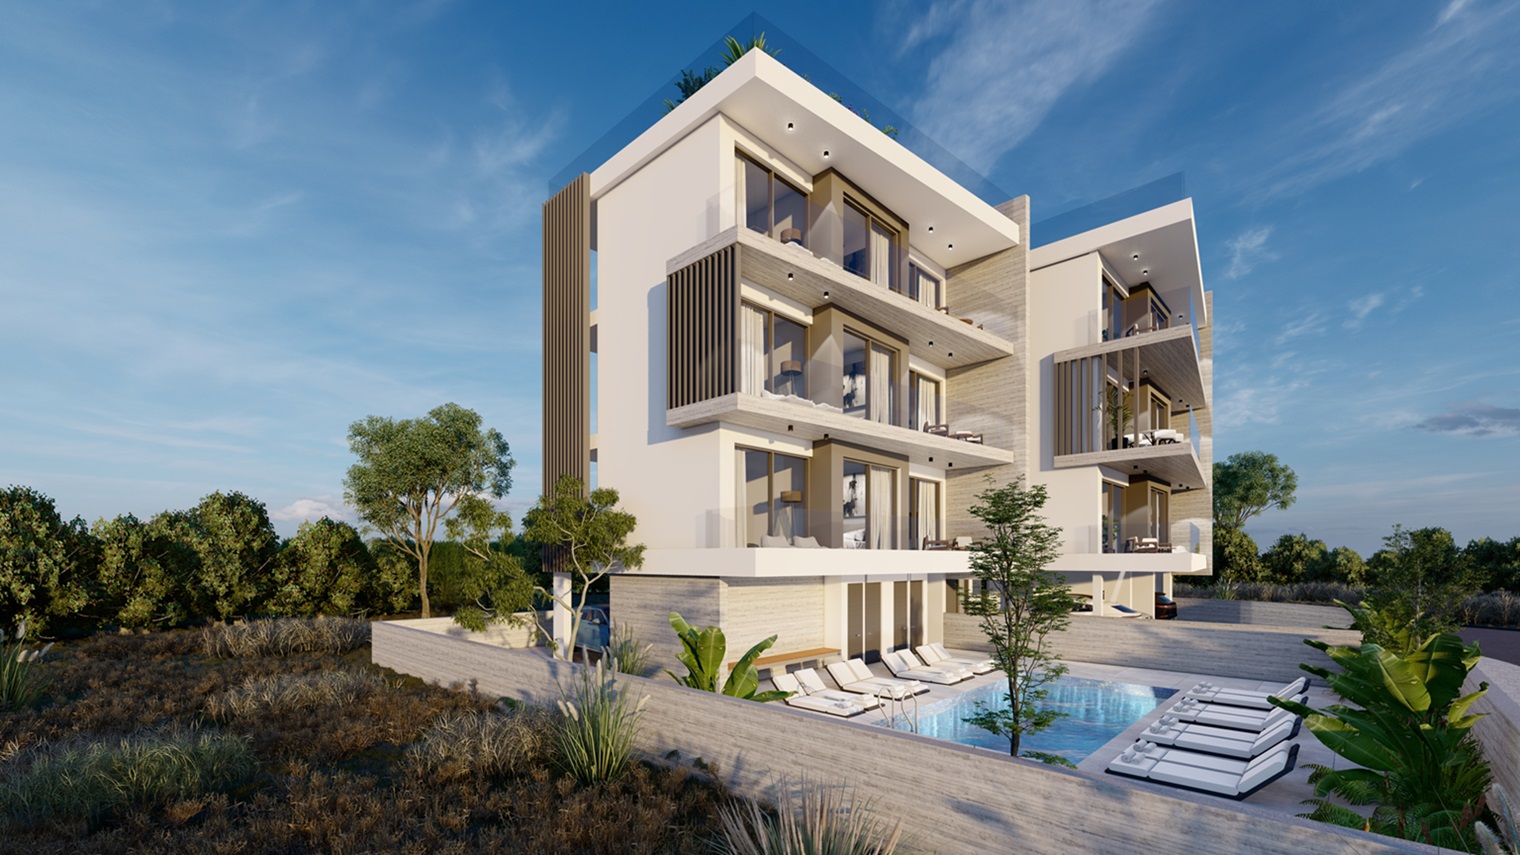 2 Bedroom Apartment for Sale in Paphos – Universal